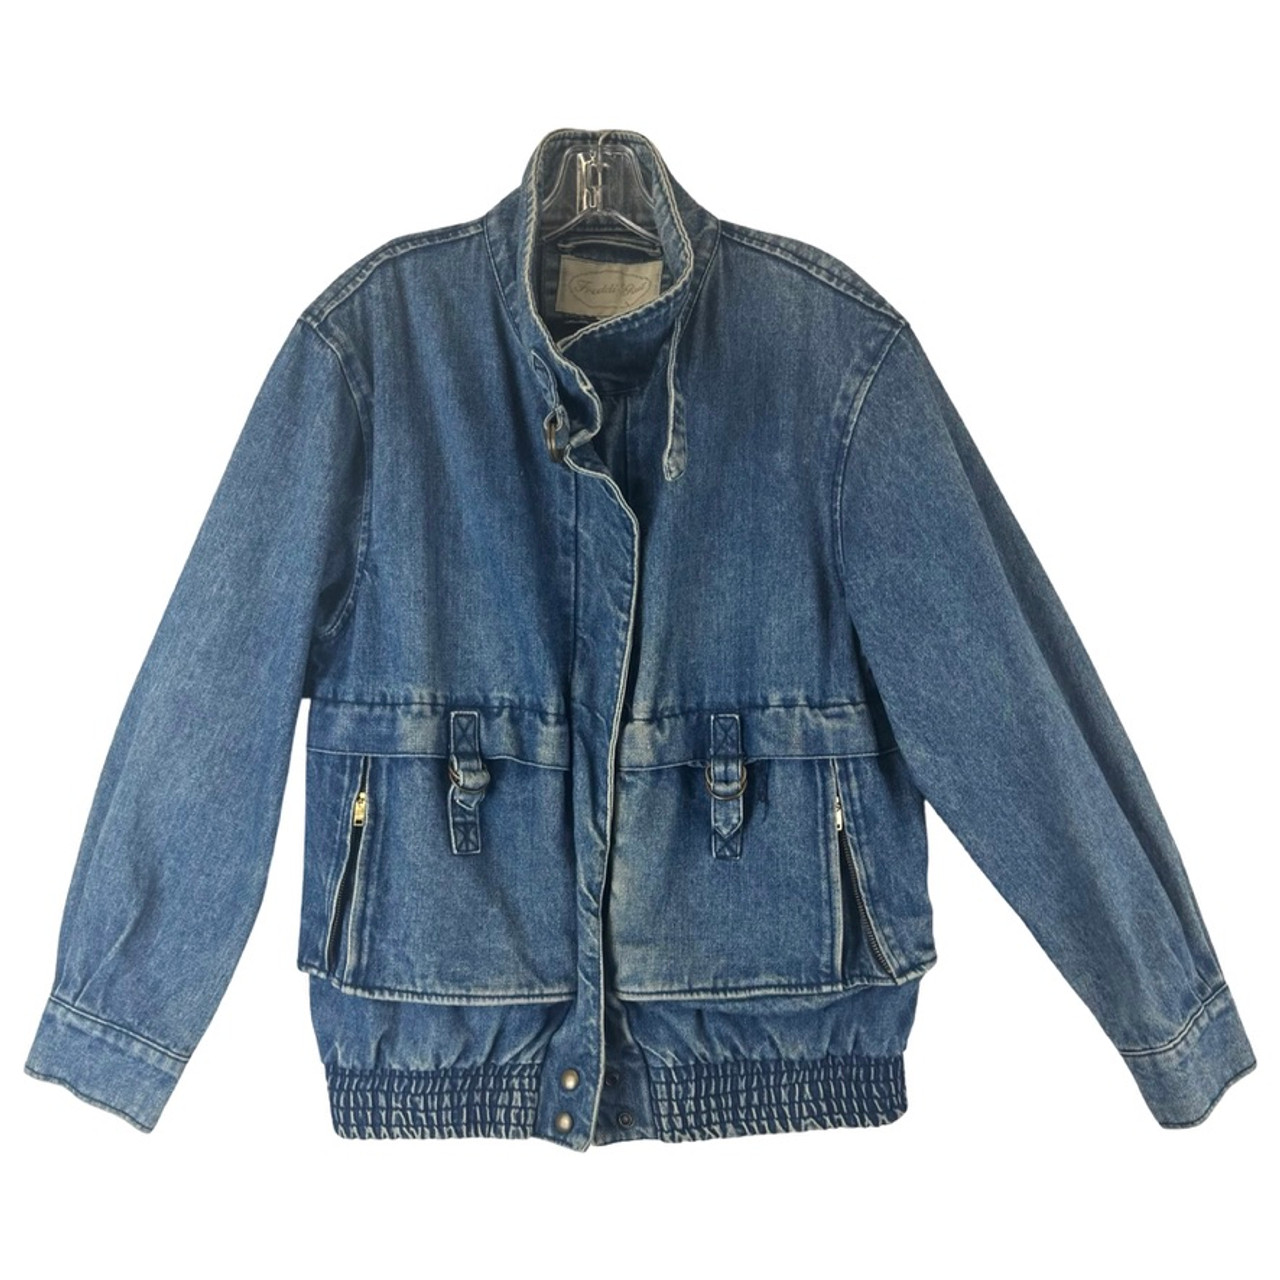 Vintage Denim Bomber Jacket | Urban Outfitters Canada